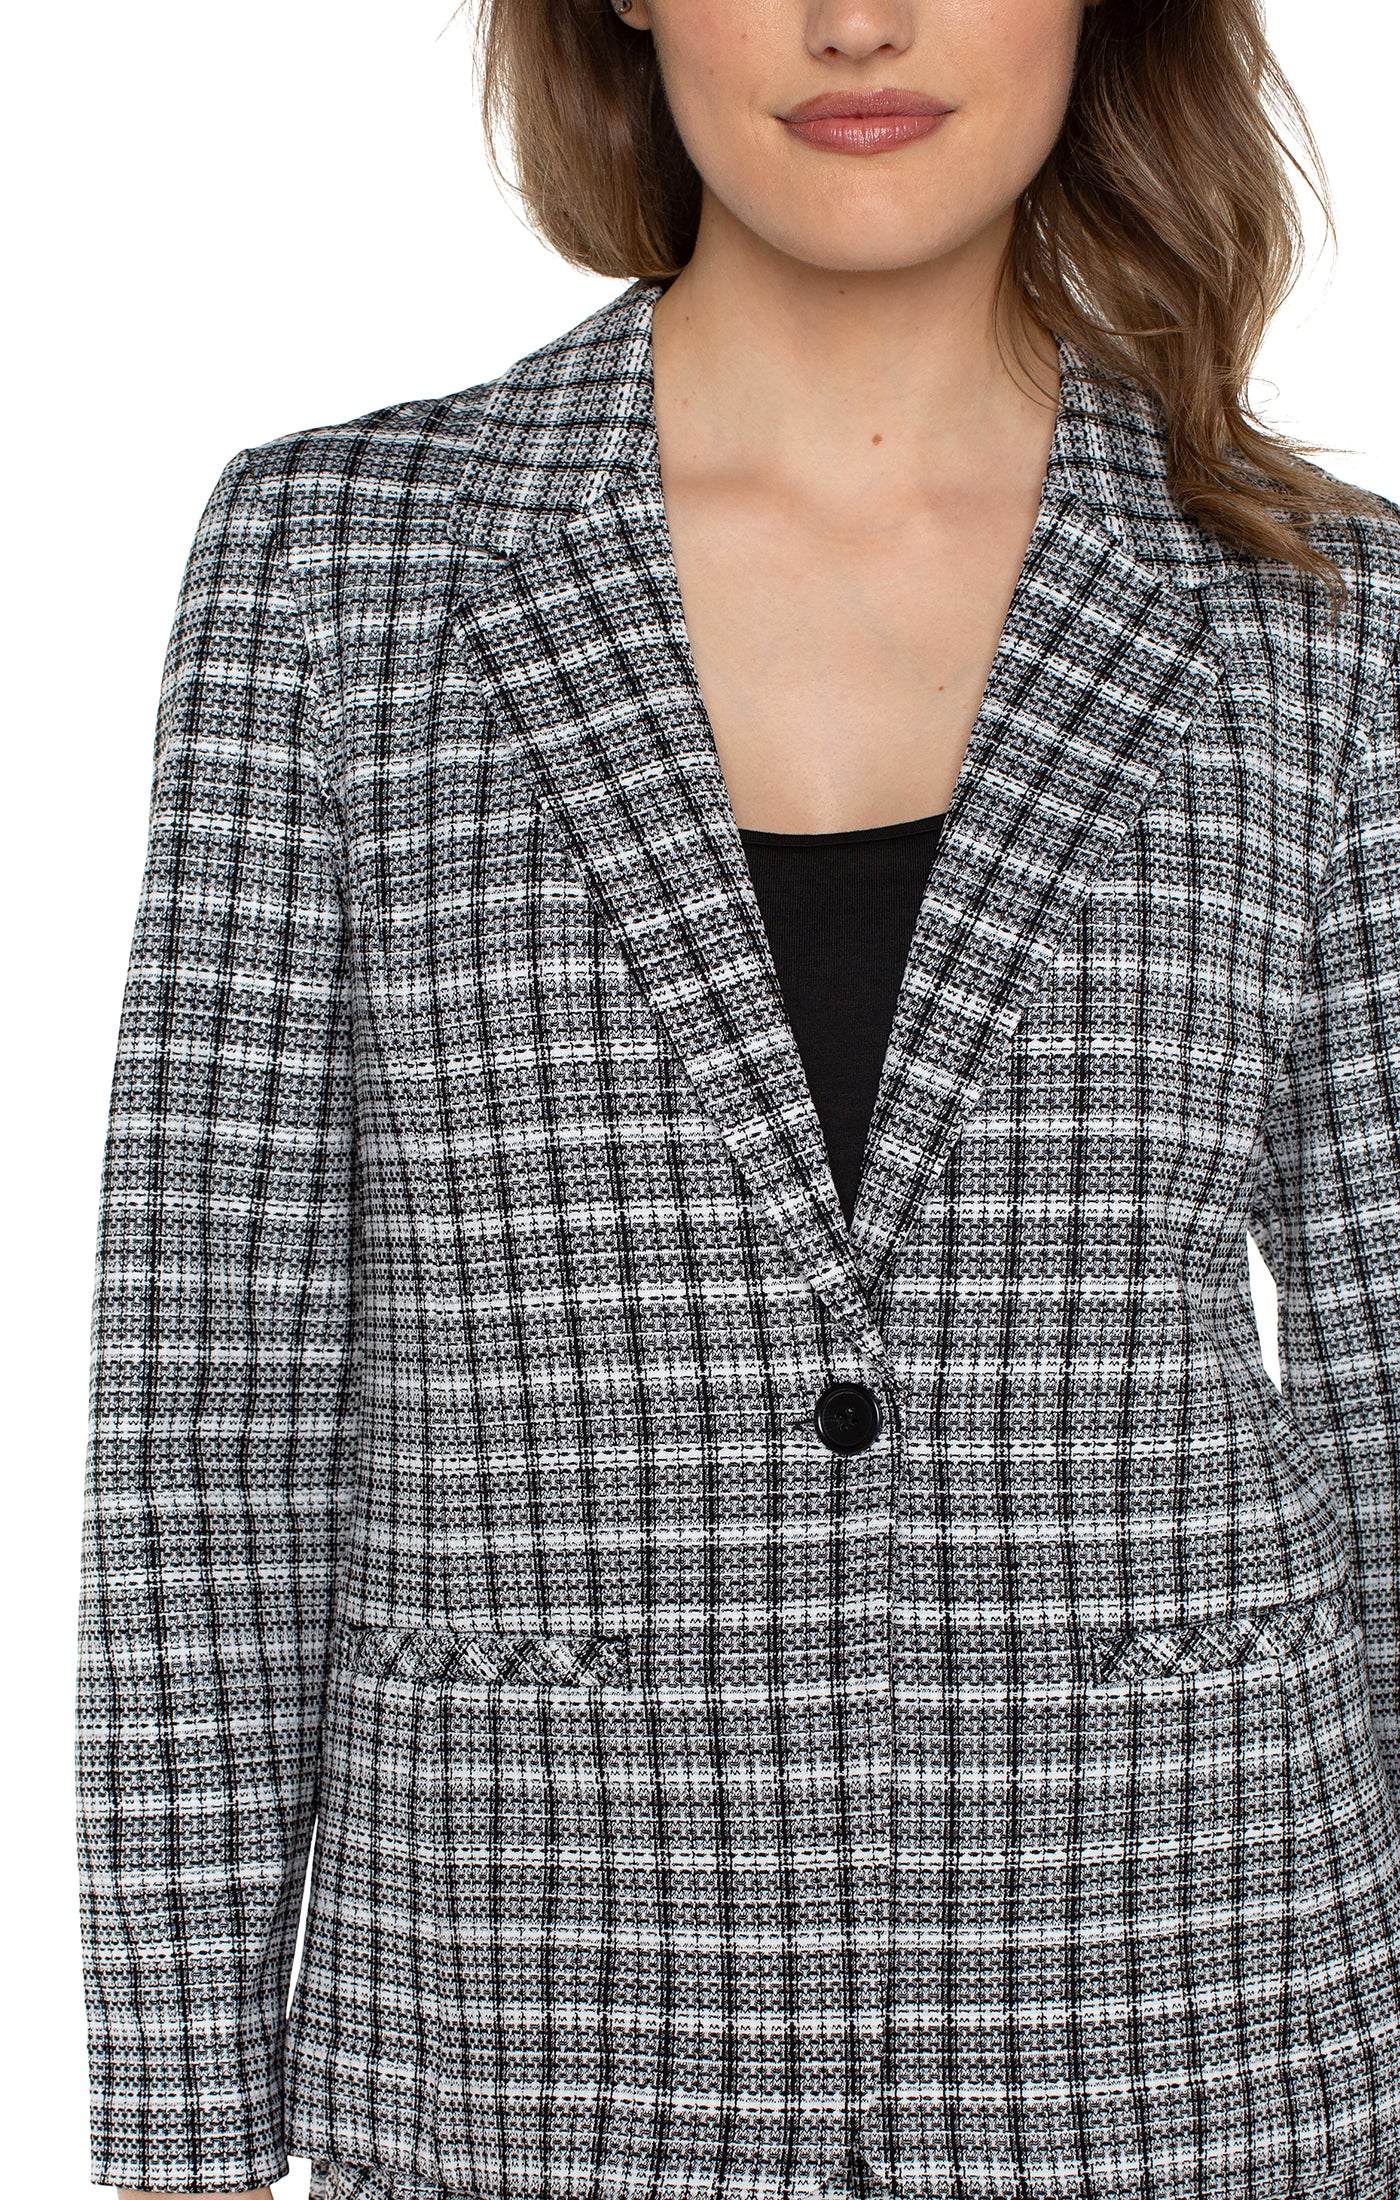 Liverpool Fitted Blazer Black/White plaid Close Up View